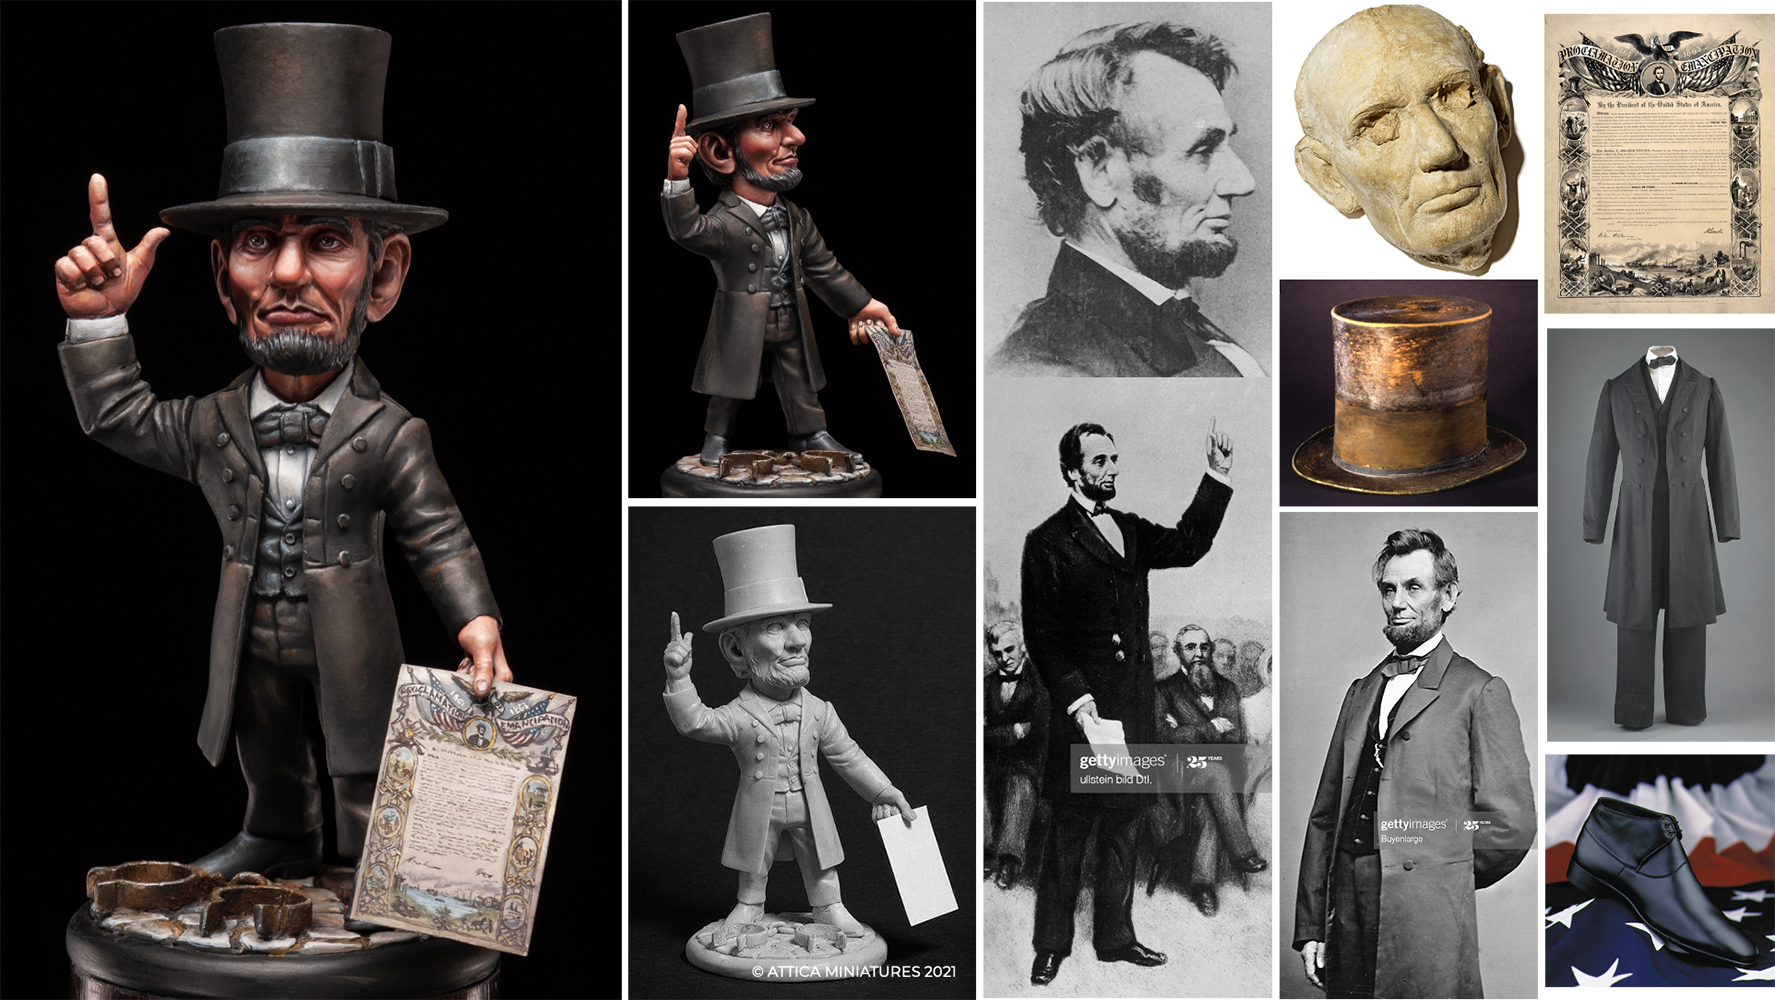 images/abraham-lincoln/lincoln-process-logo.png